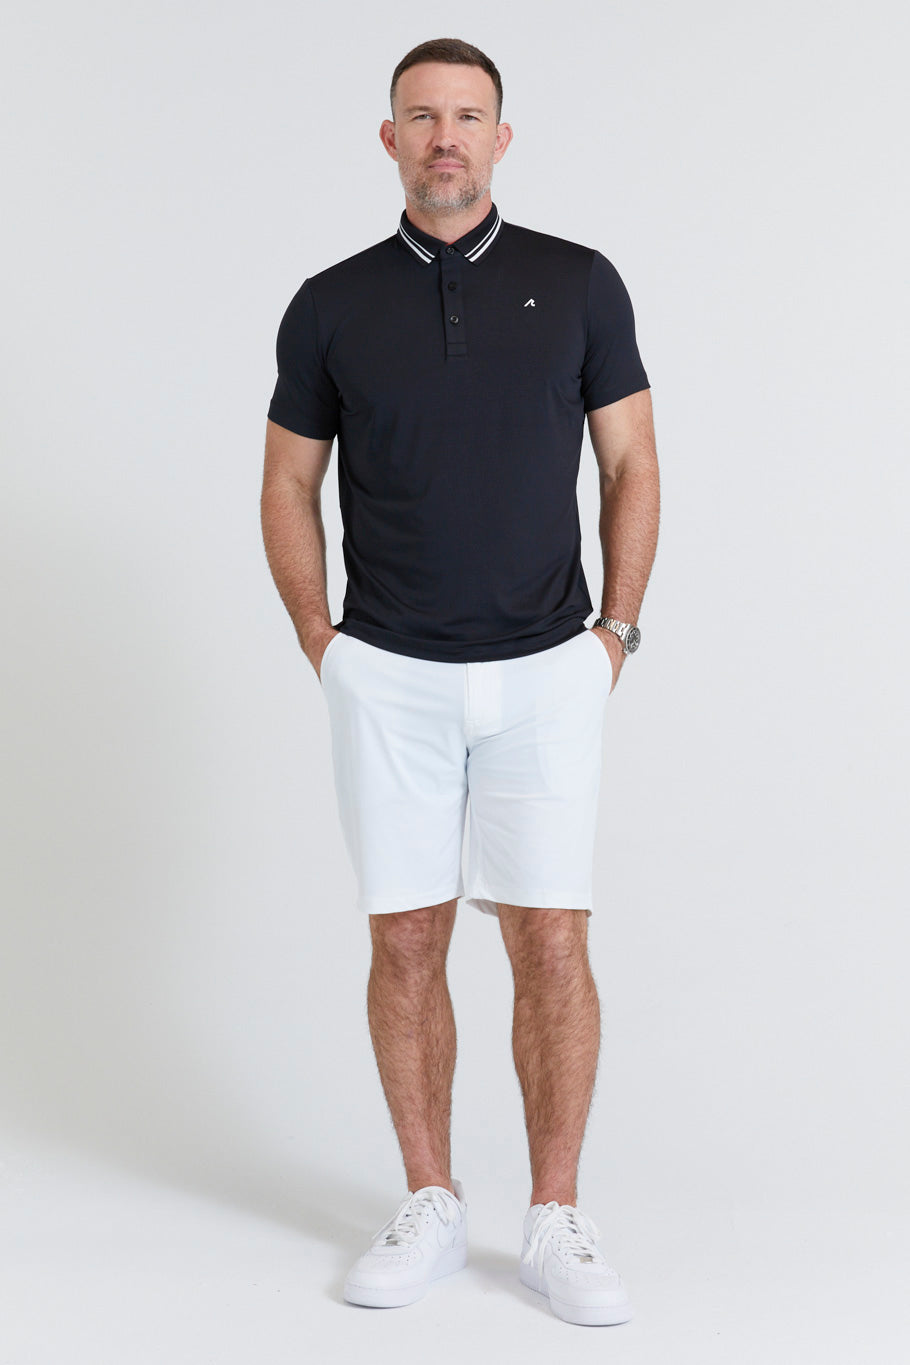 Image of the cadman polo in tuxedo ss23